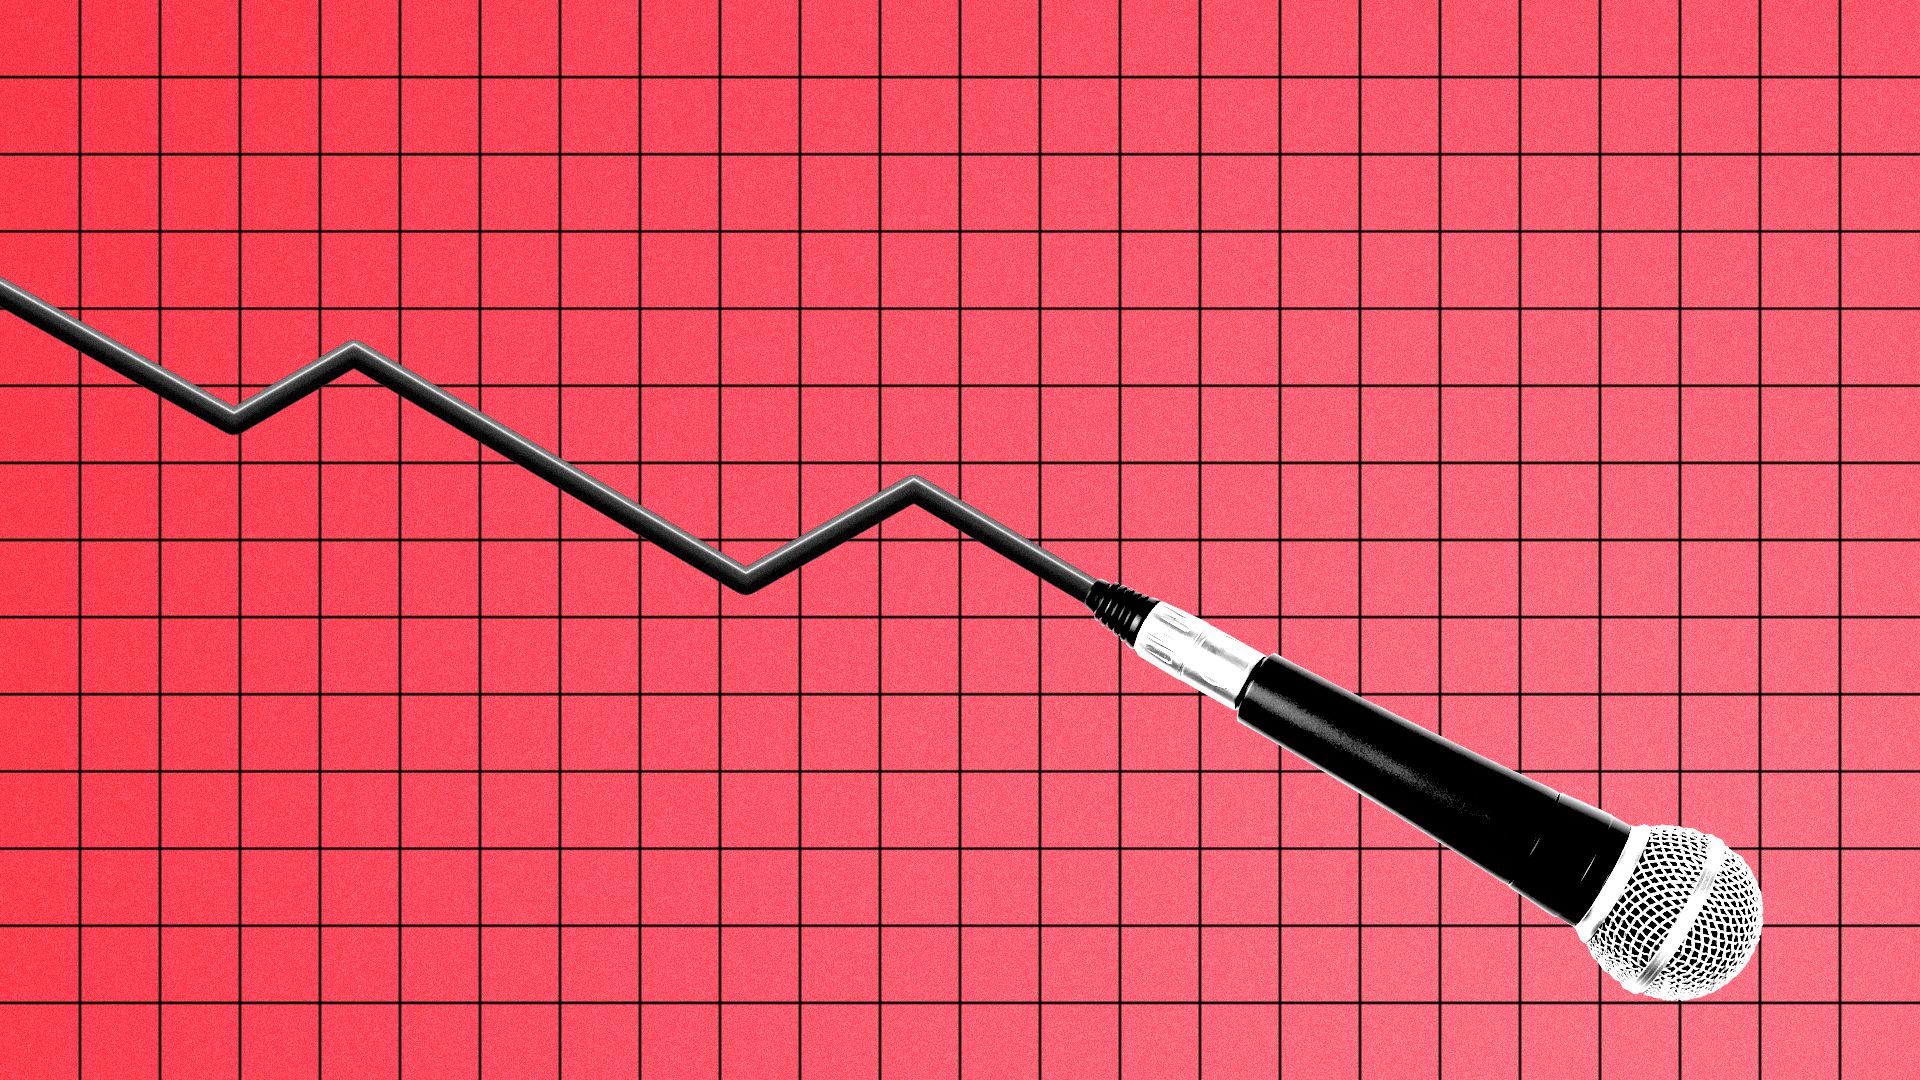 Illustration of a microphone and cord in the shape of a downward chart trendline.